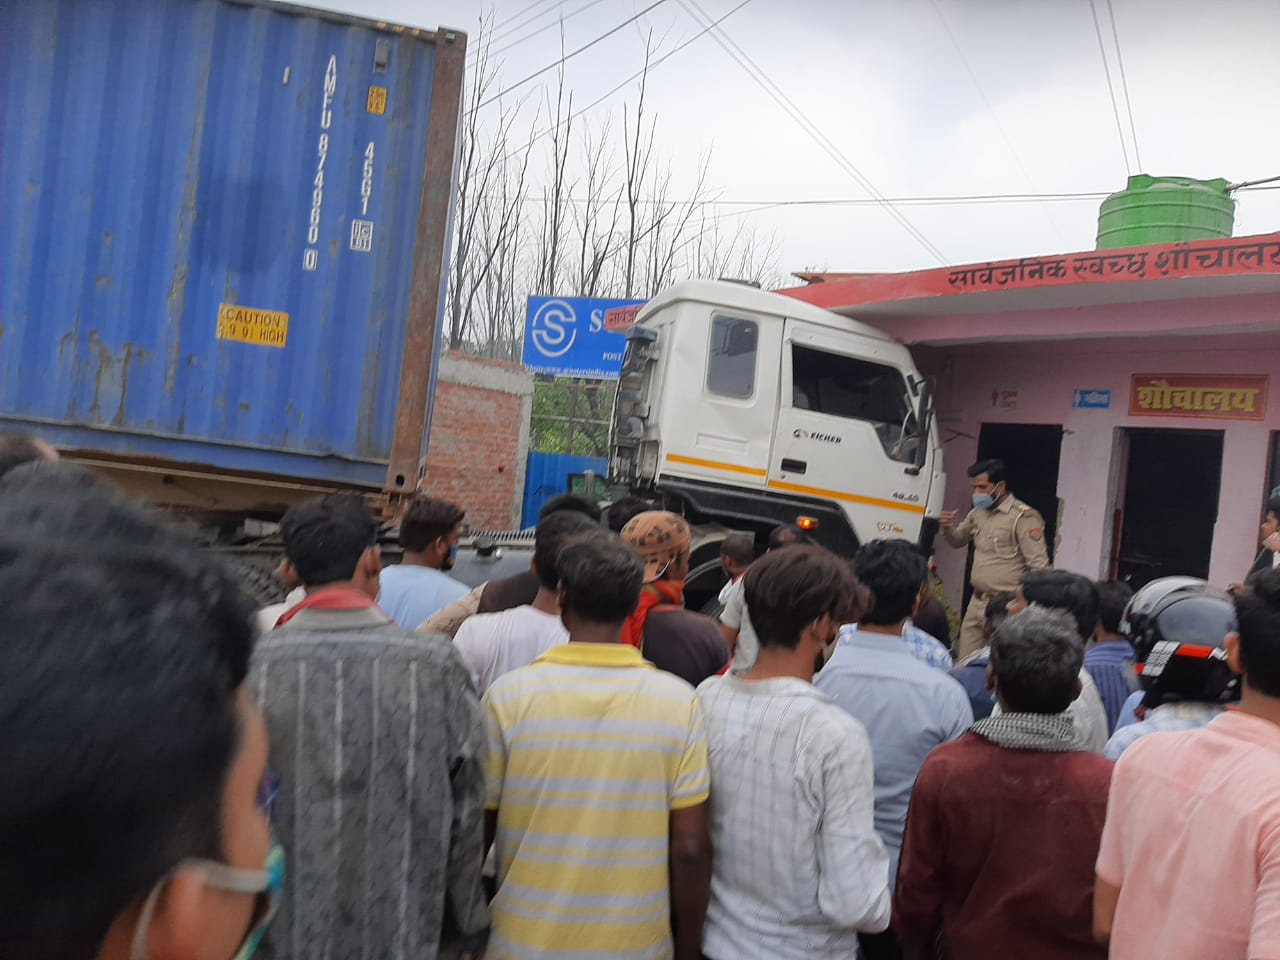 lucknow-uncontrolled-trailer-rammed-into-a-public-toilet